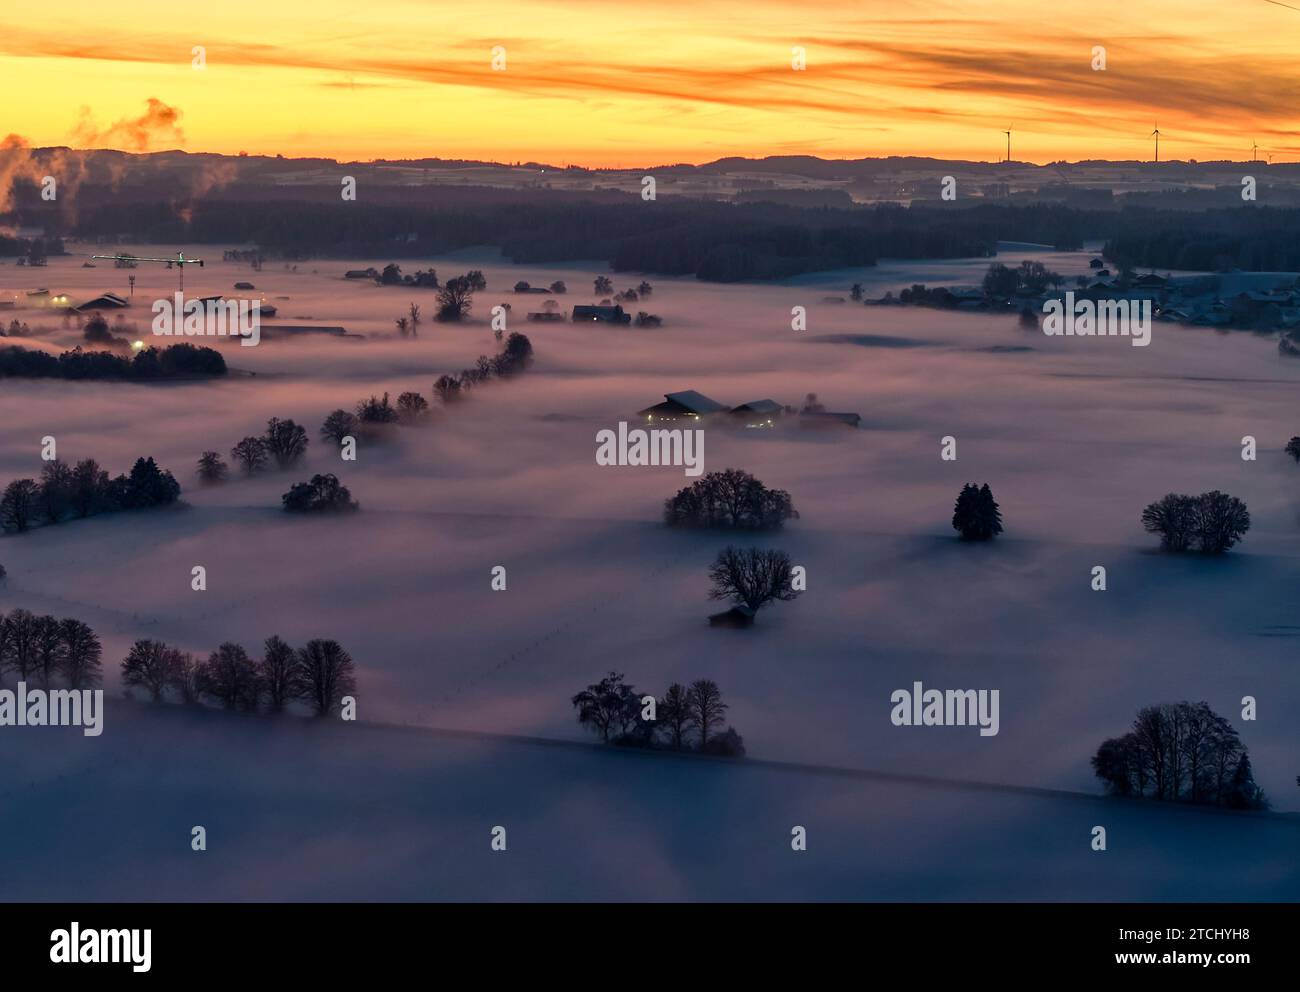 Drone photo of the Bavarian landscape with city view Ruderatshofen with fog in the evening short after sunset in Marktoberdorf, Germany, Dec 3, 2023.  © Peter Schatz / Alamy Stock Photos Stock Photo